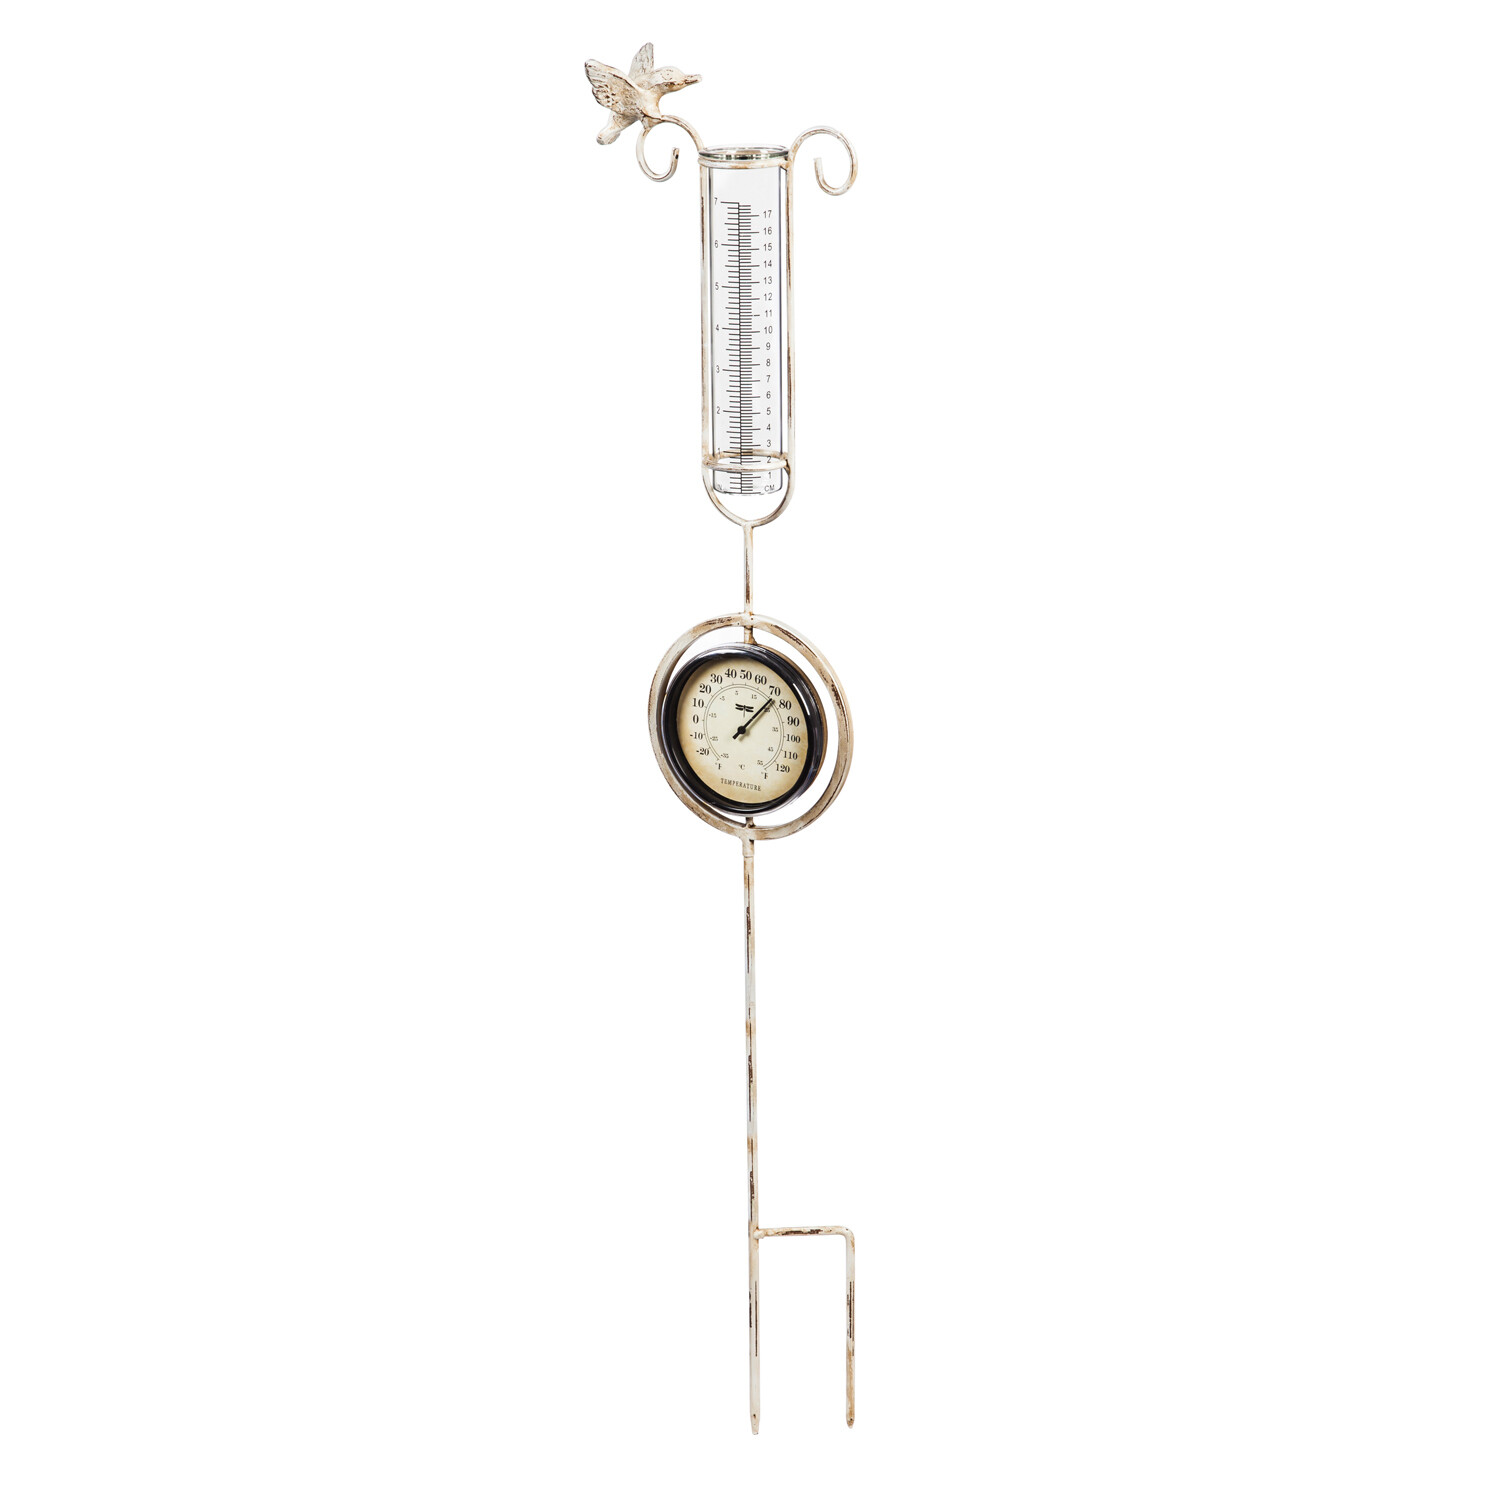 Thermometer and Rain Gauge